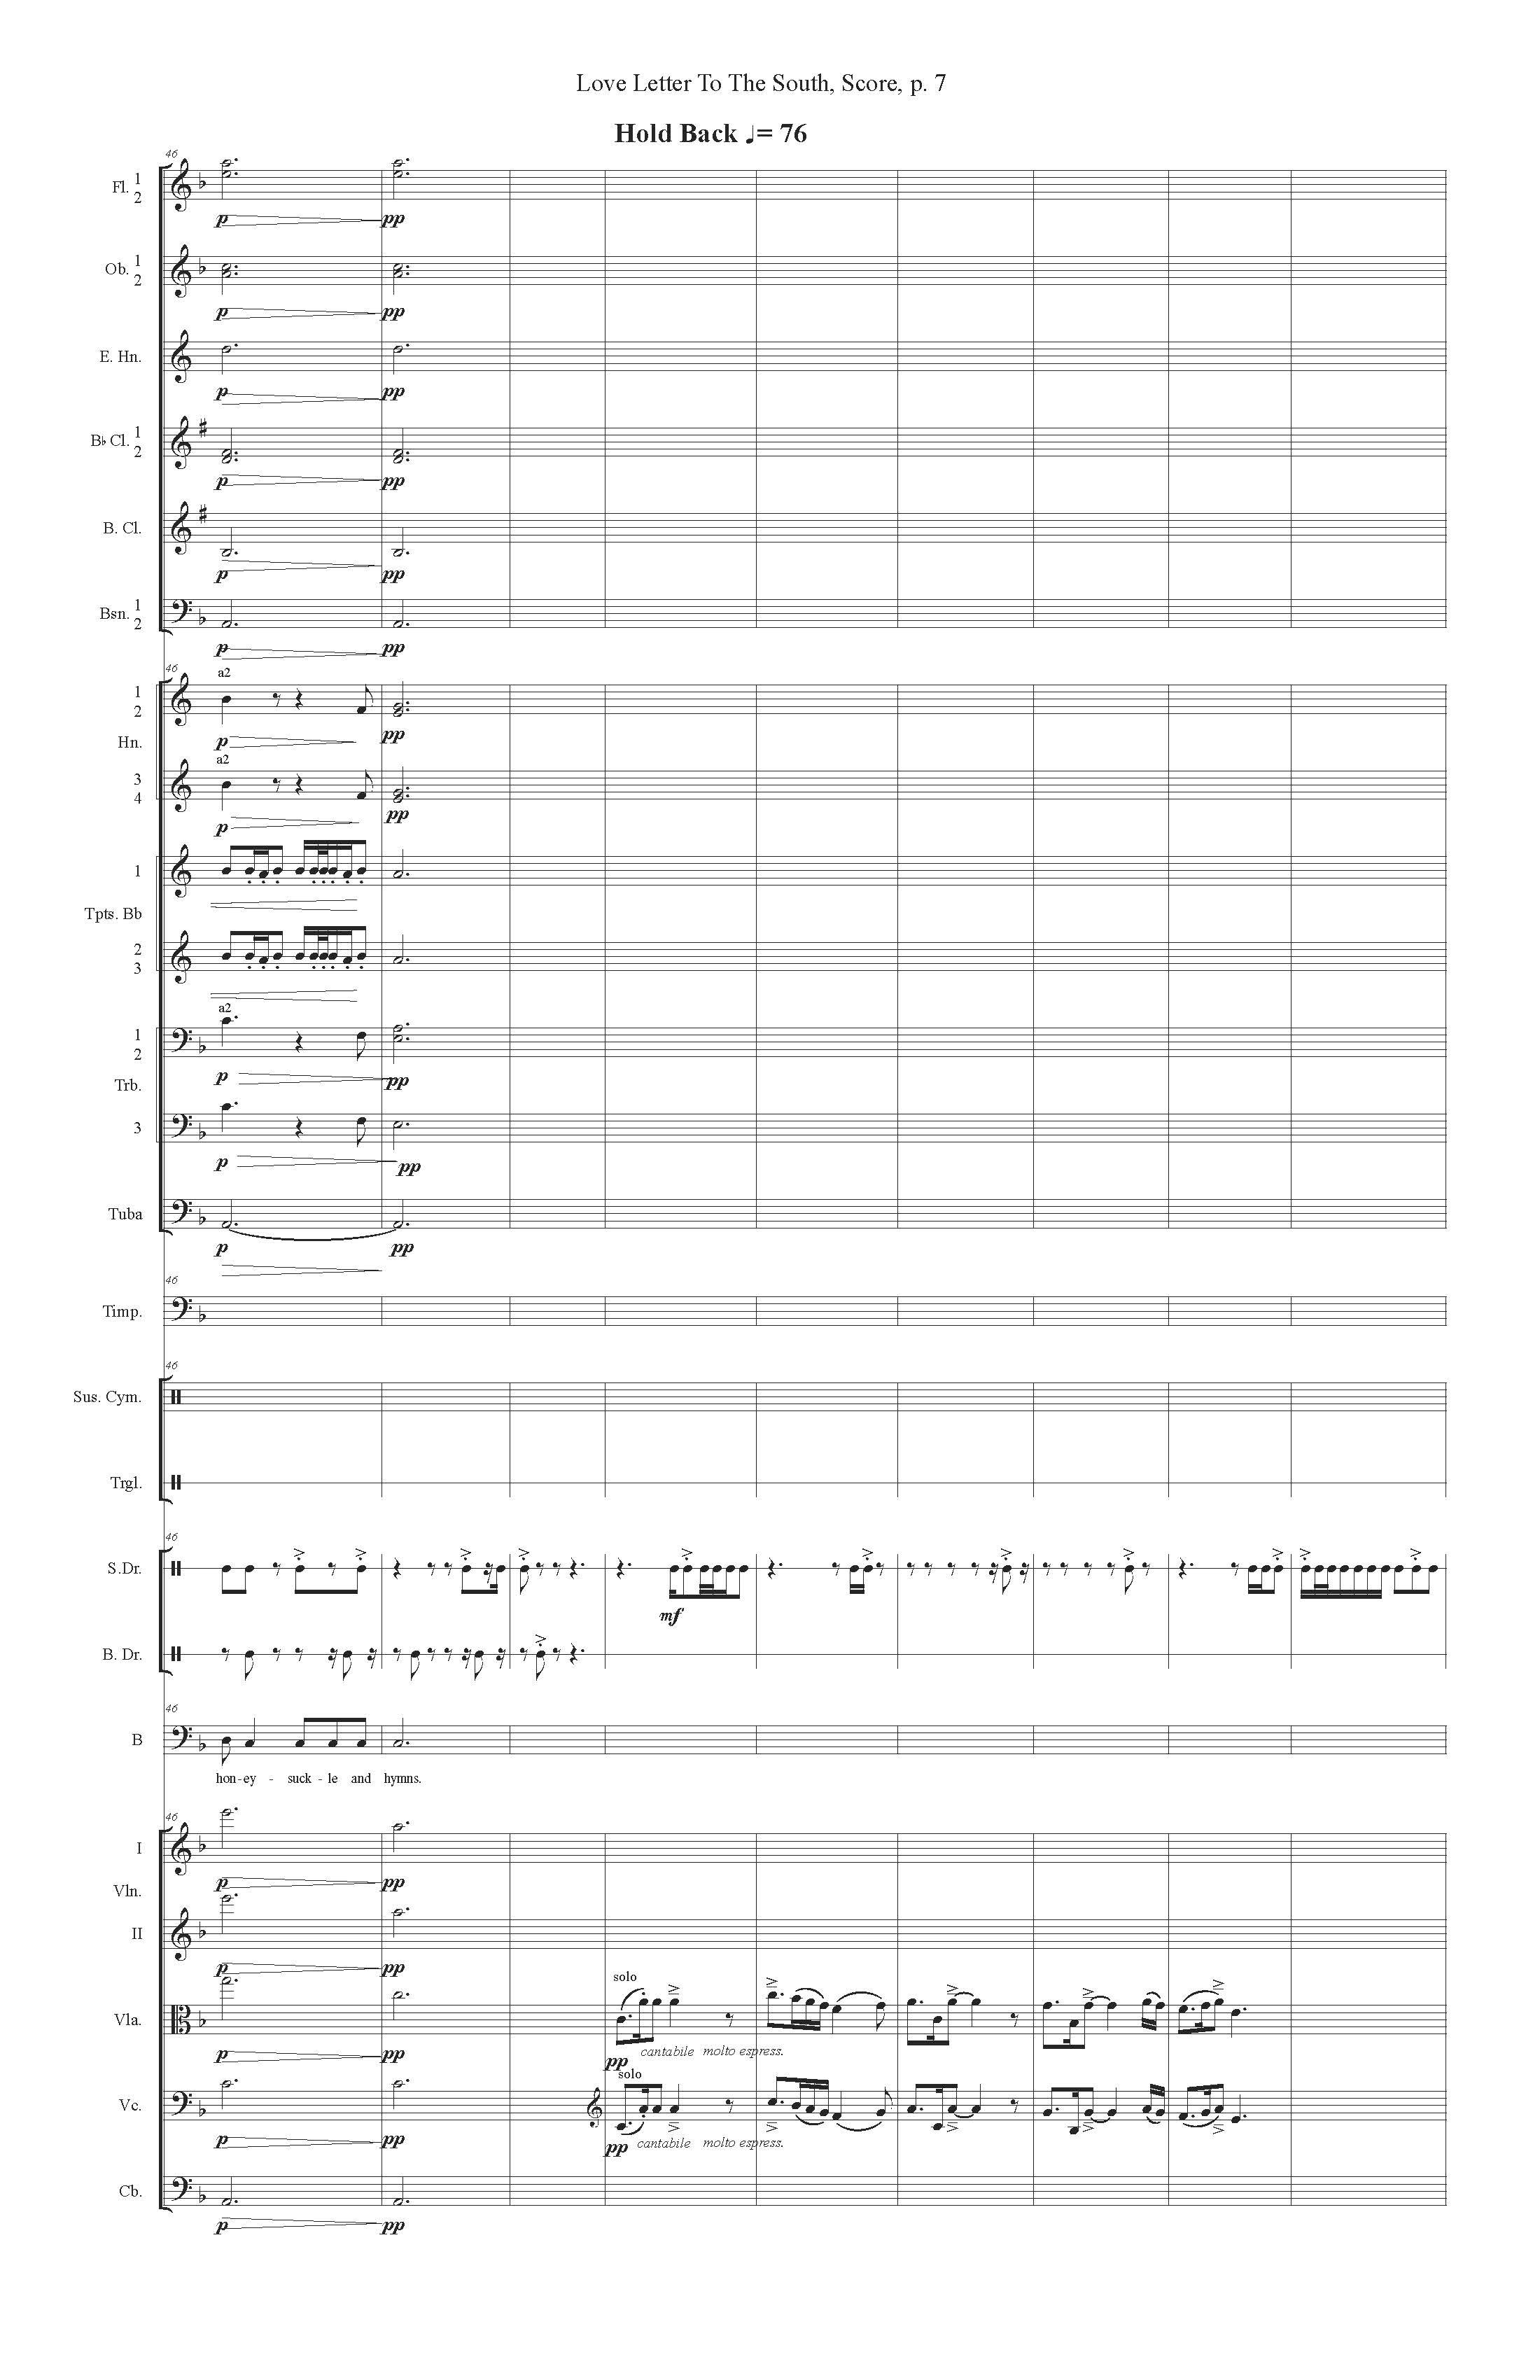 LOVE LETTER TO THE SOUTH ORCH - Score_Page_07.jpg